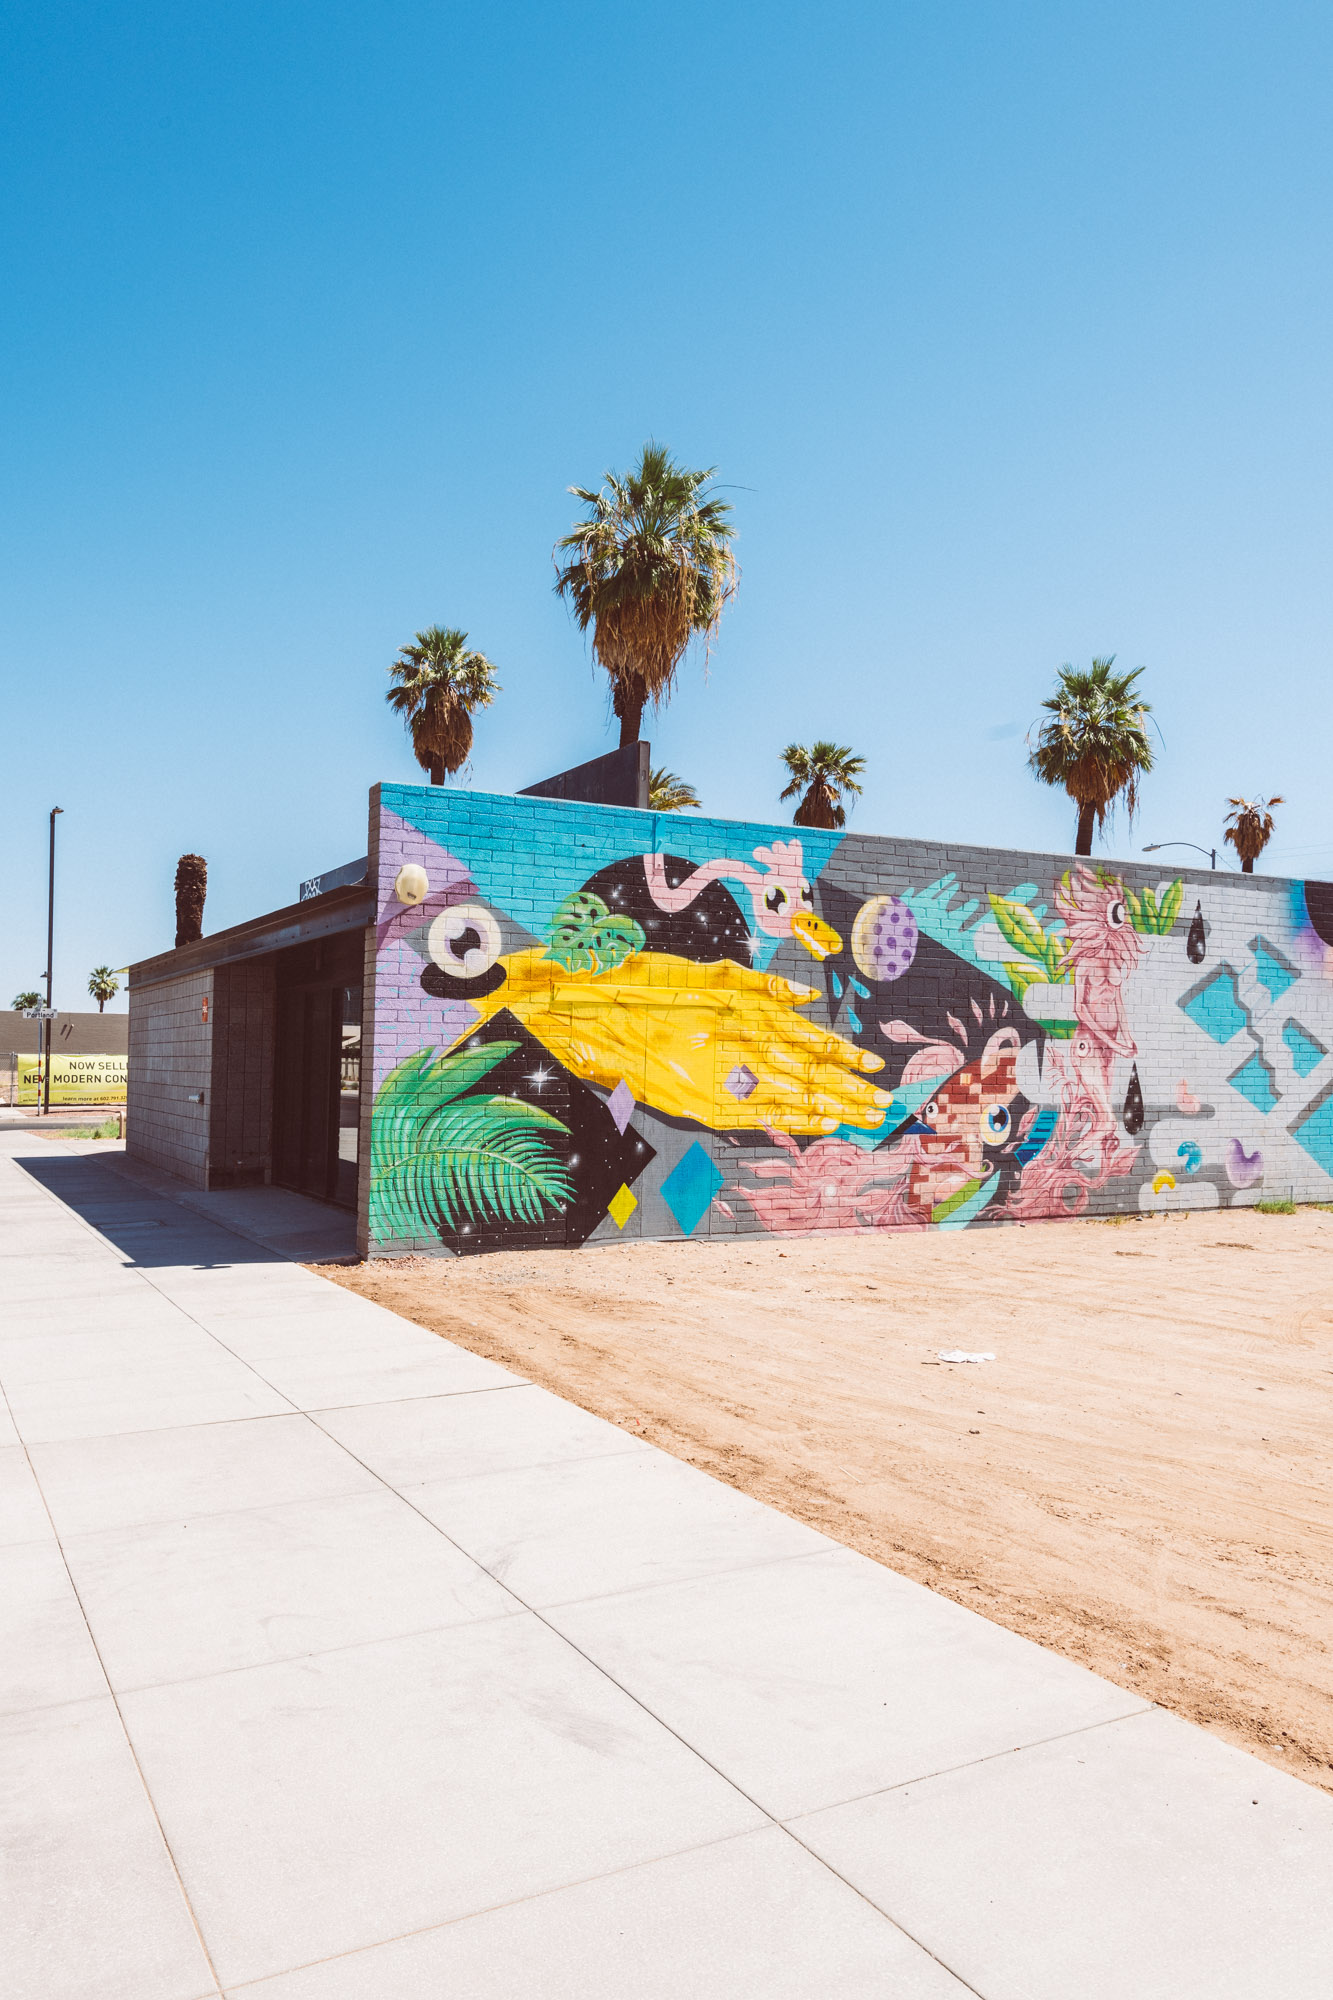 Things To Do In Phoenix — Roosevelt Row Arts District — Jeff On The Road — All photos are under Copyright  © 2019 Jeff Frenette Photography / dezjeff. To use the photos, please contact me at dezjeff@me.com.